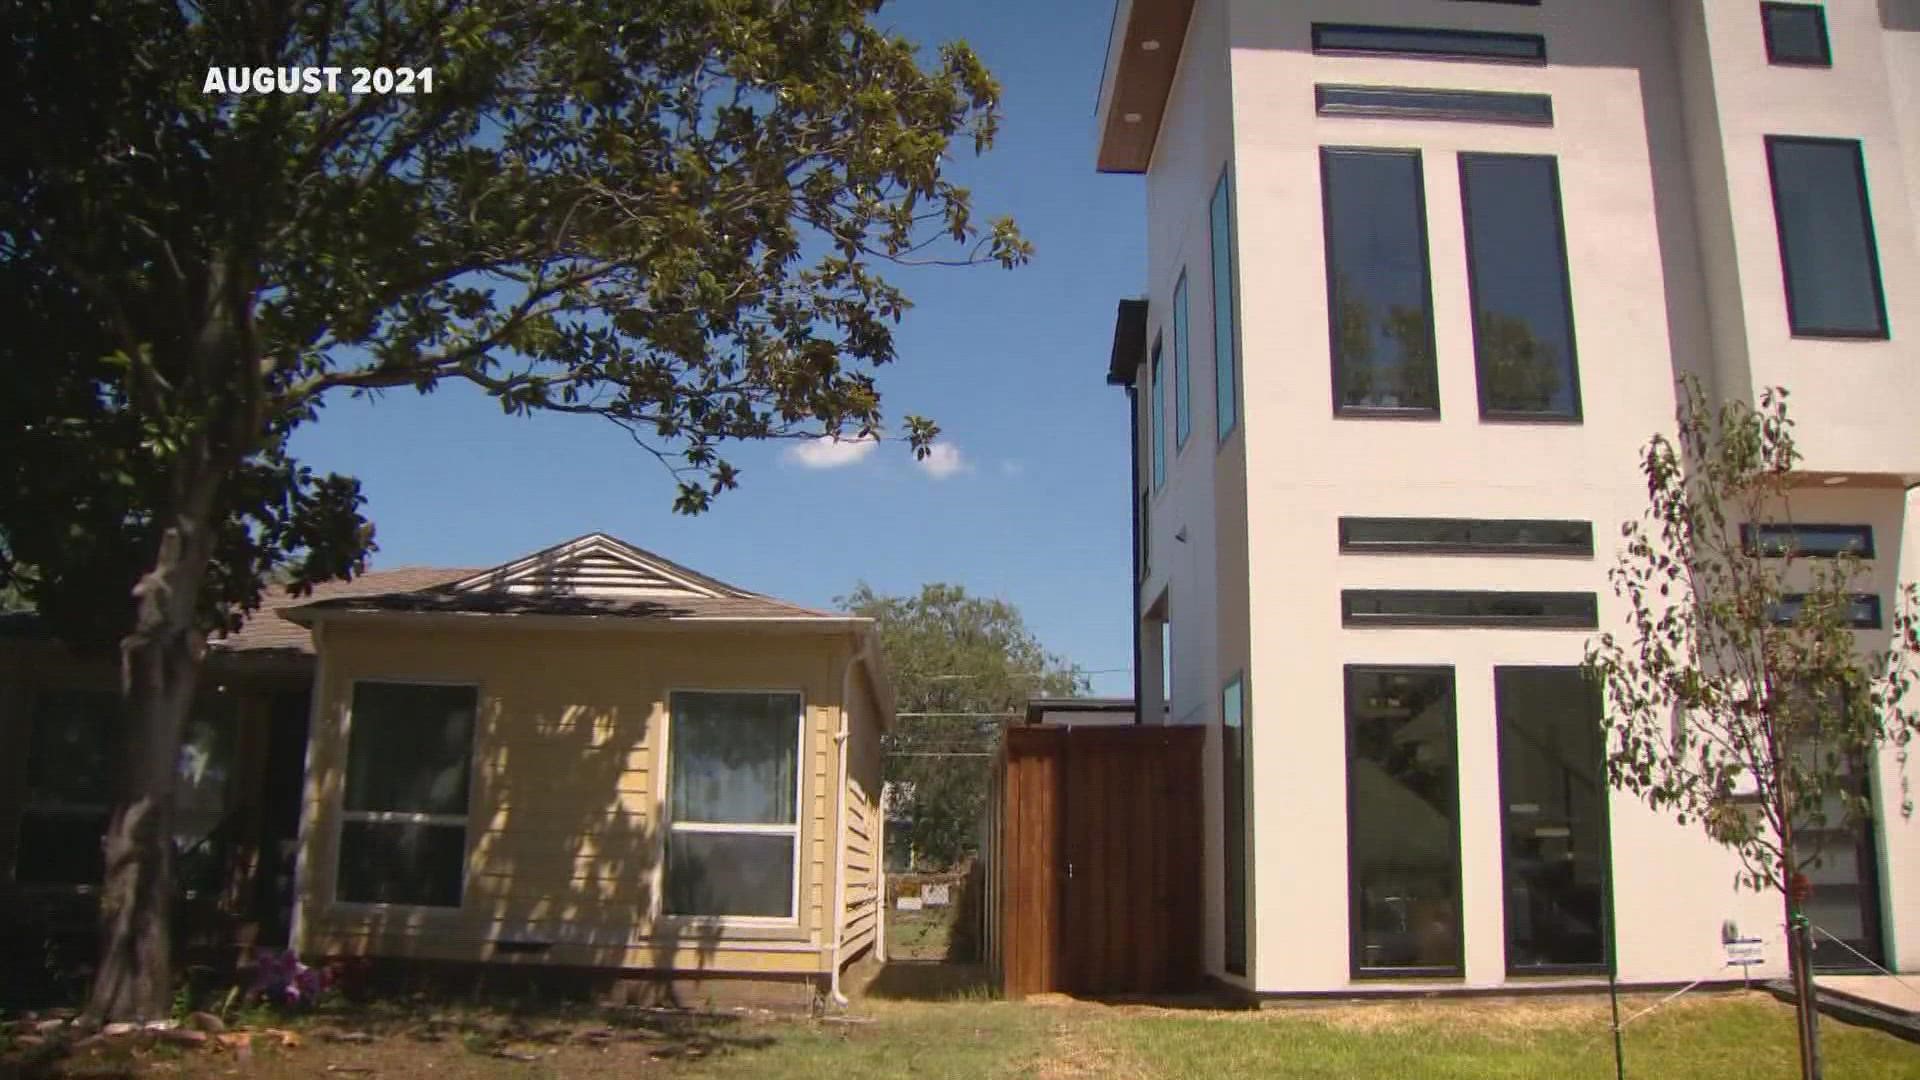 Dallas City Council voted to limit the maximum lot coverage of new builds and height restrictions were changed.